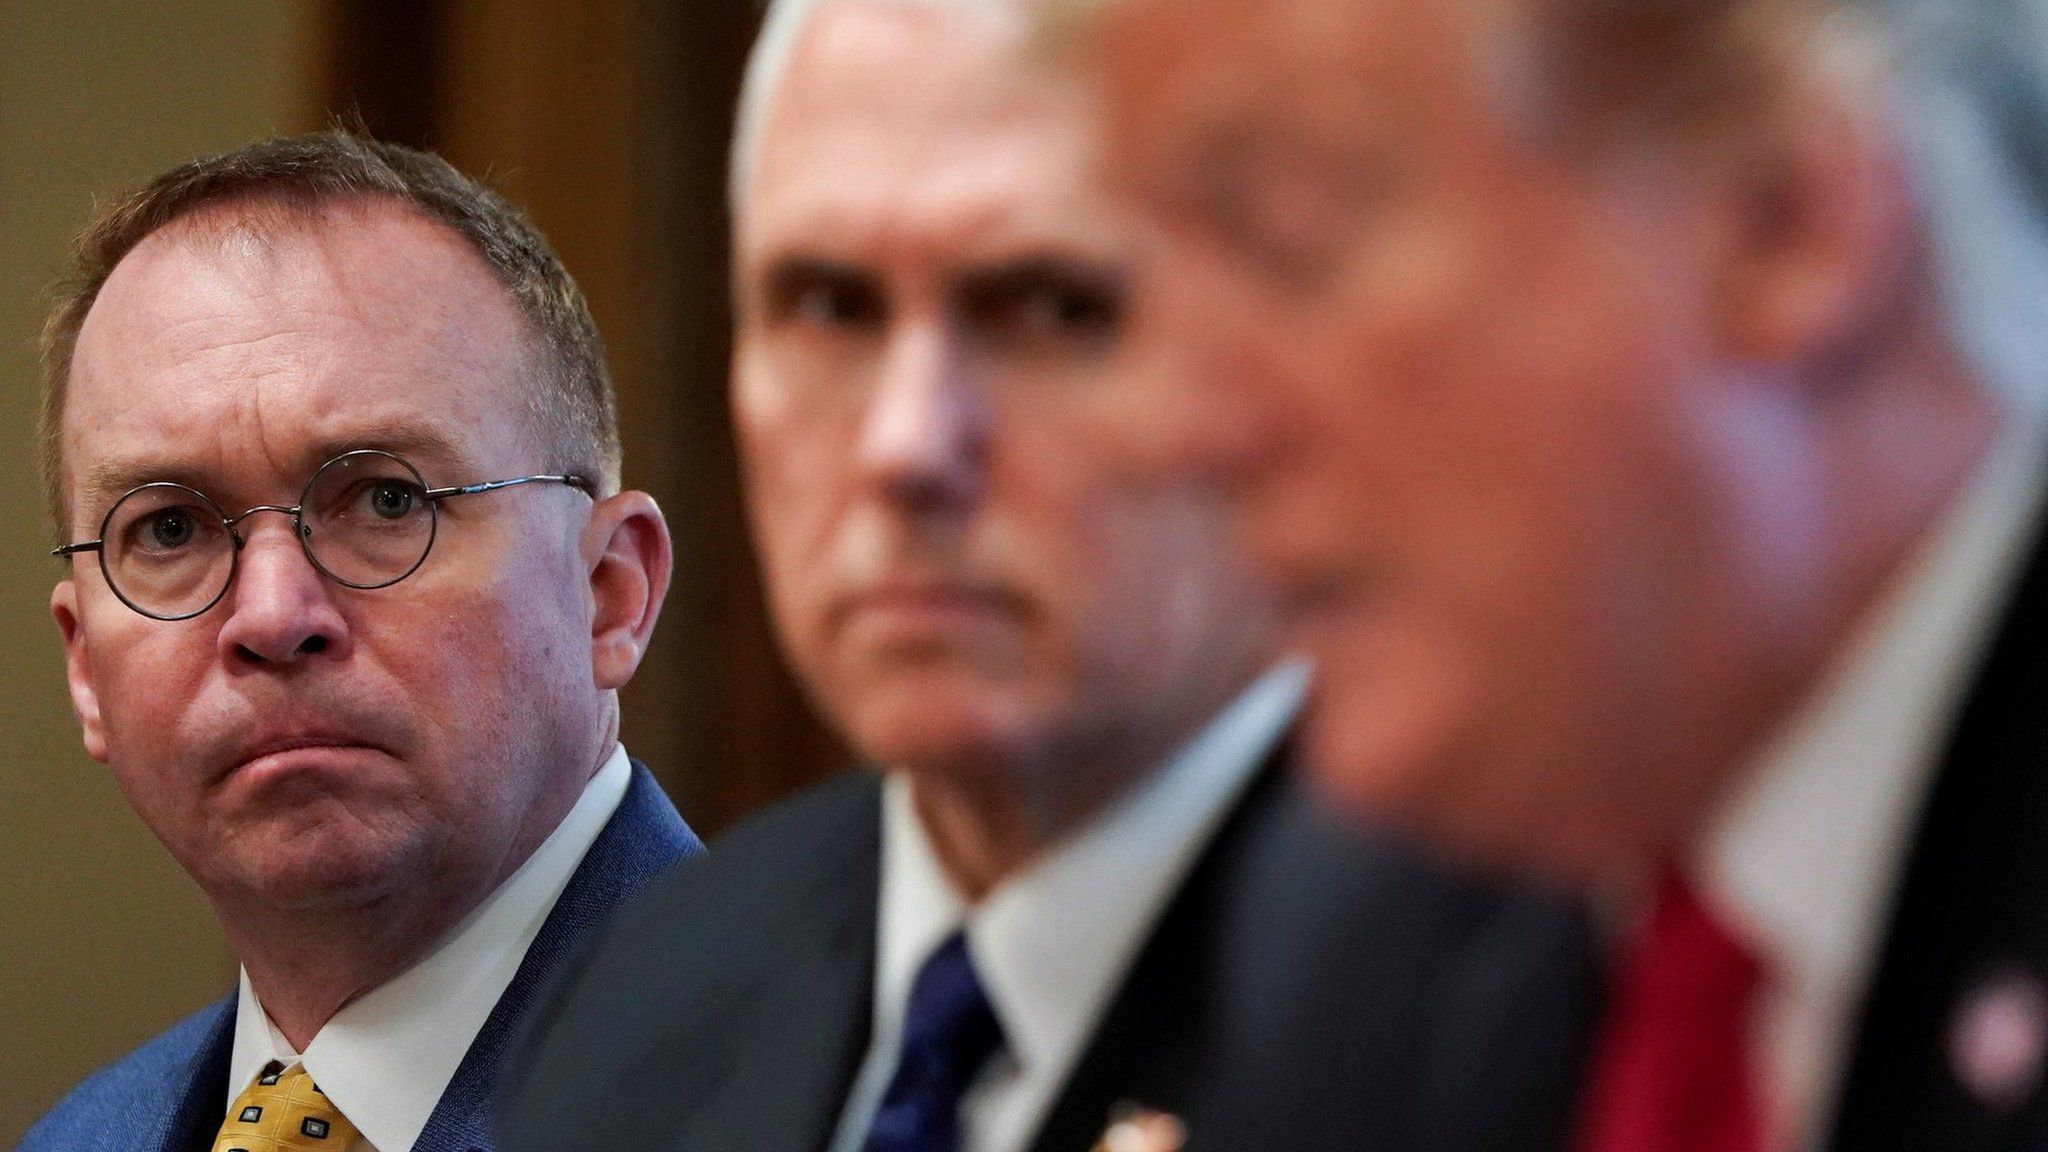 Mick Mulvaney, Mike Pence and Donald Trump